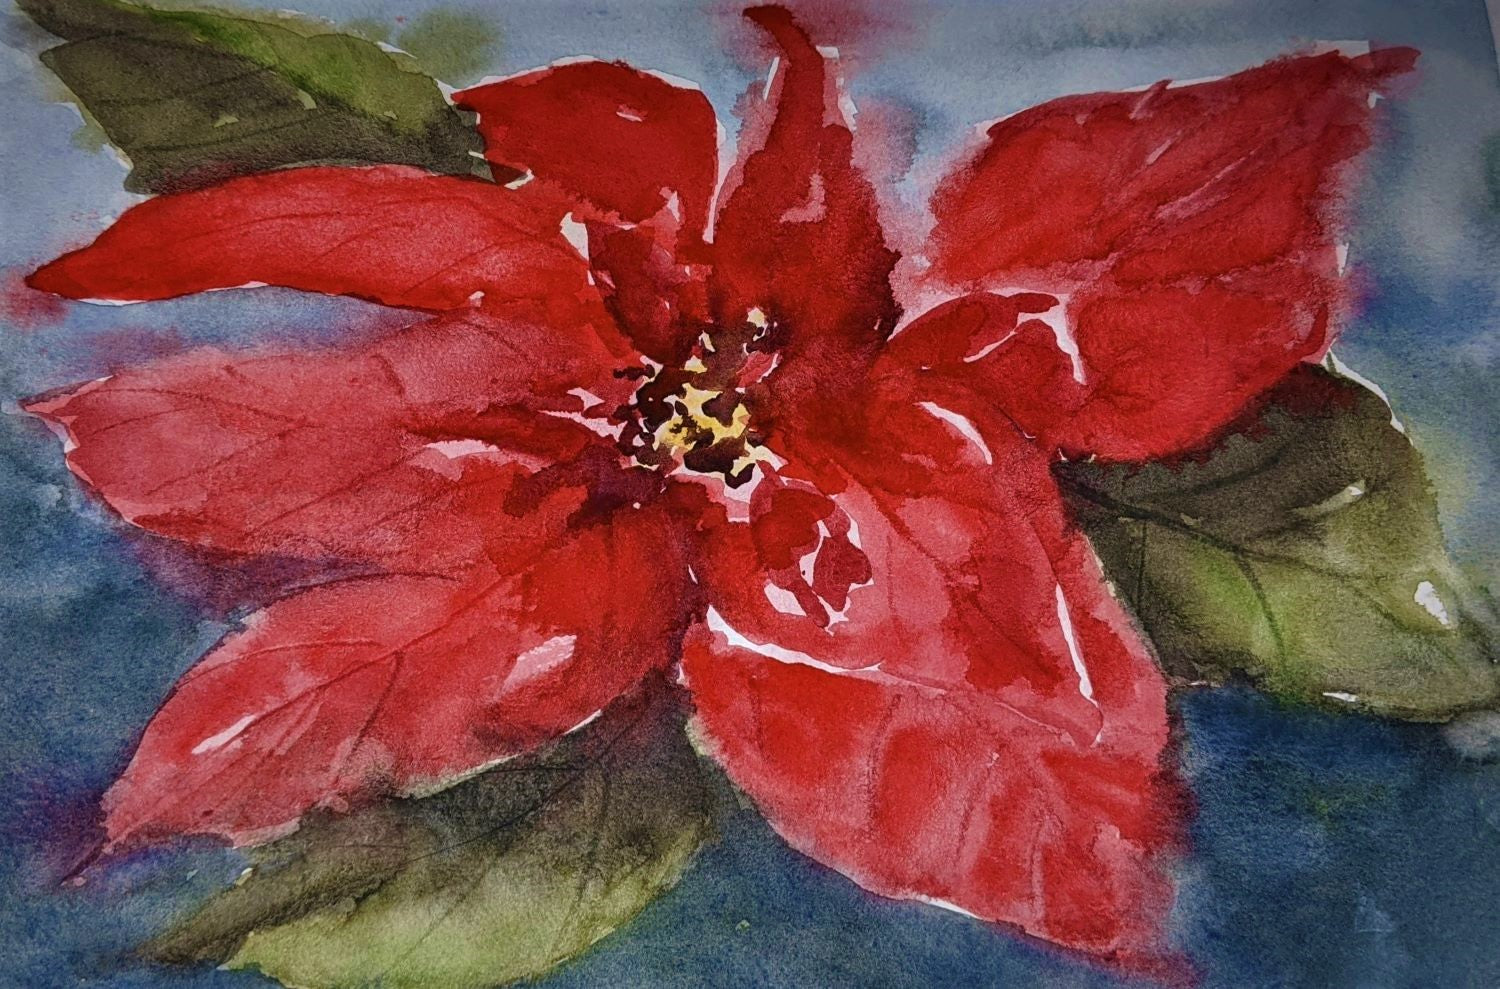 Poinsettia Wash watercolor painting on paper